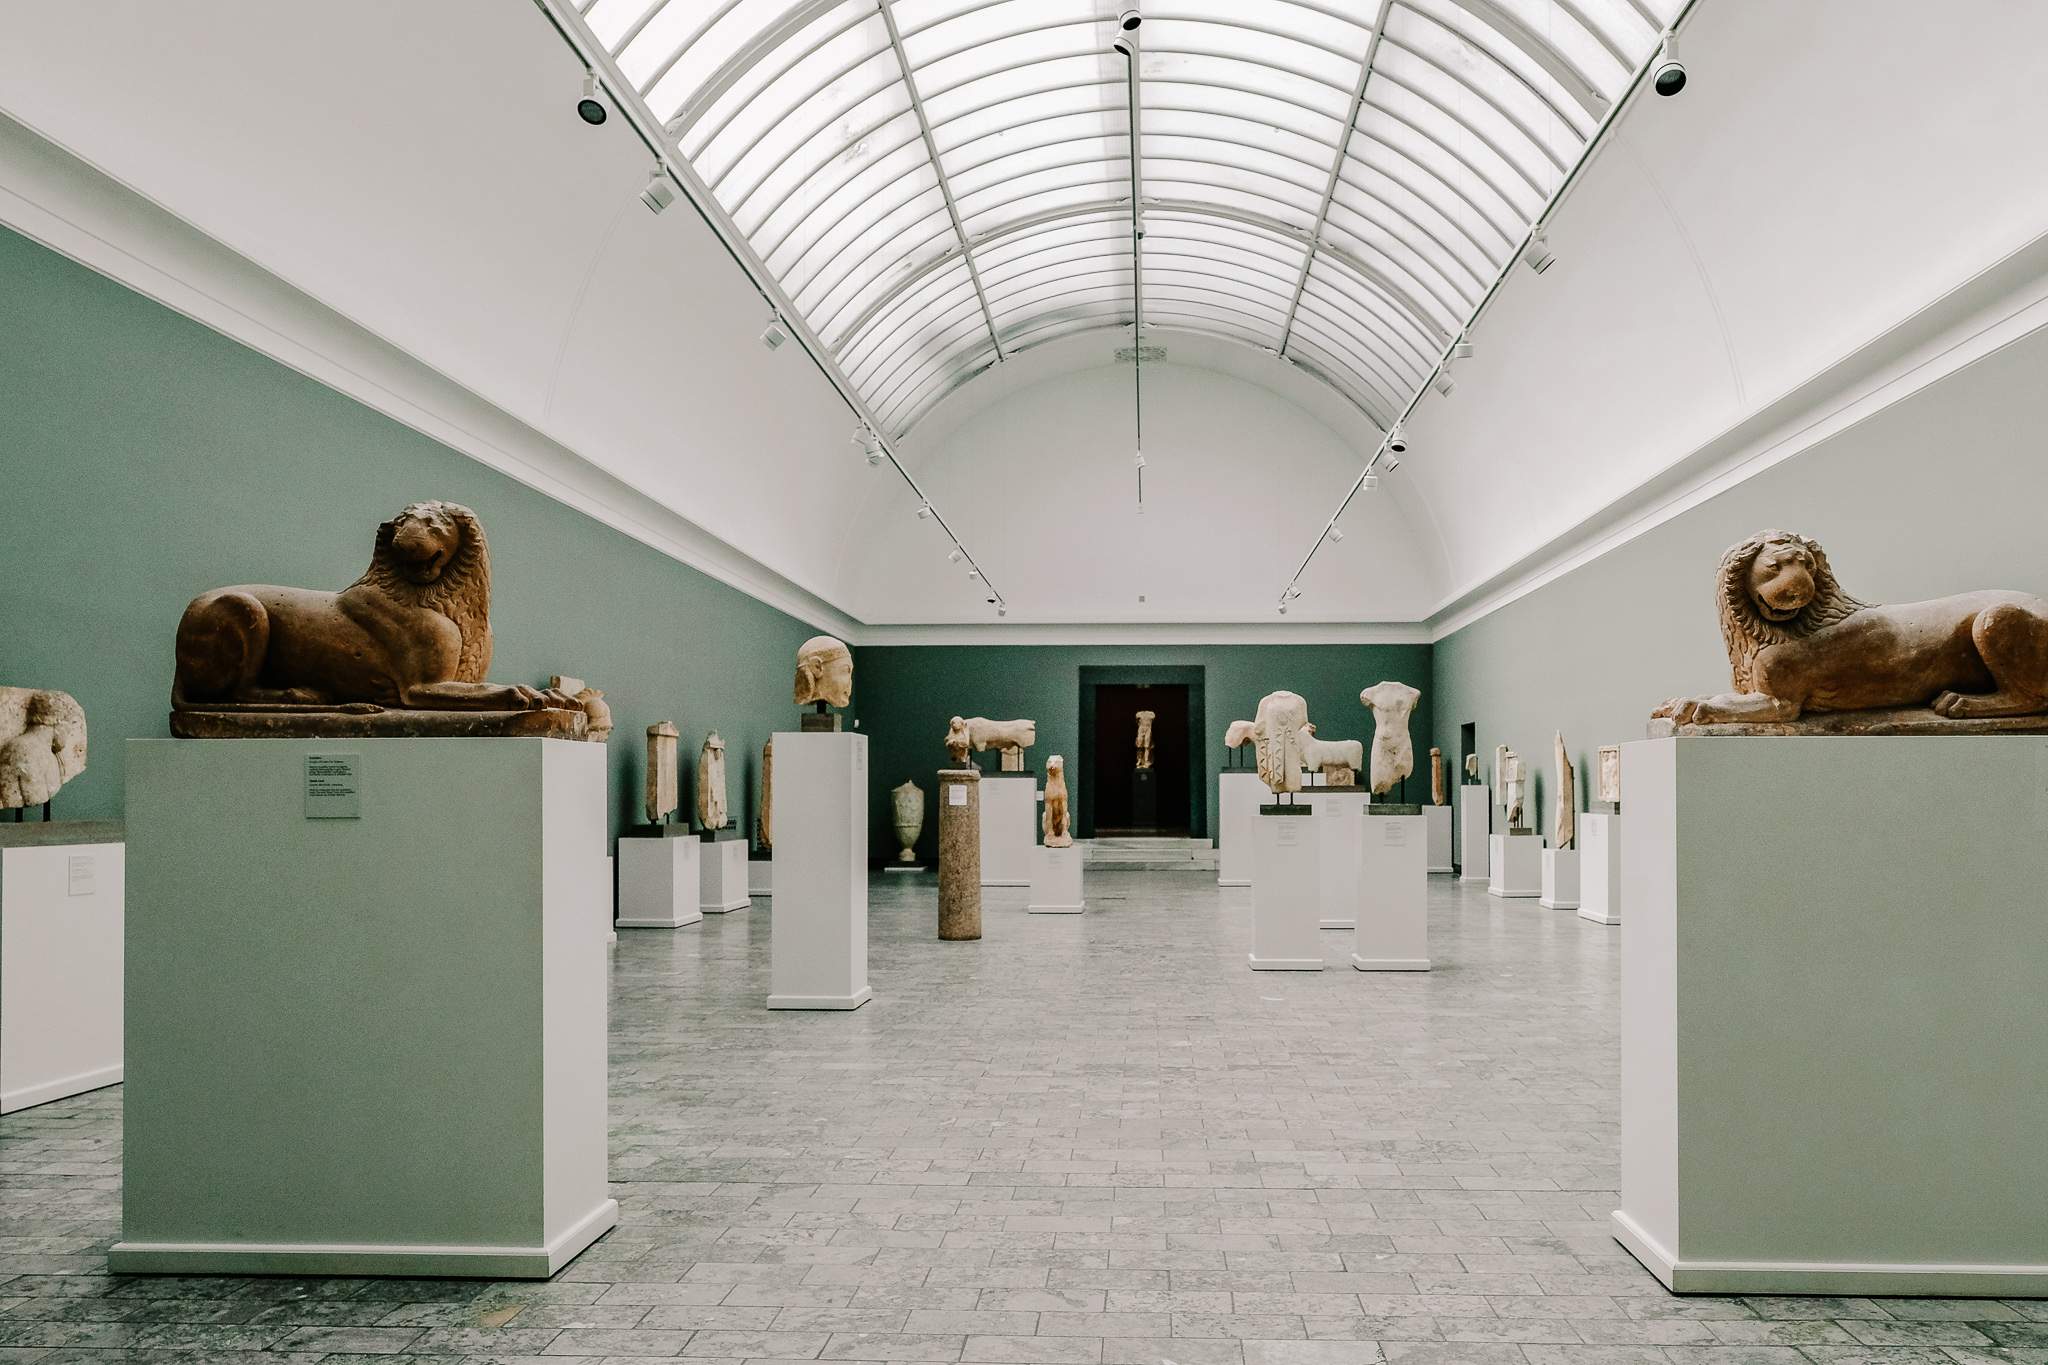 A picture of some lion sculptures in a museum in Copenhagen, in a room with green paint and a curved ceiling made of glass letting in a lot of light.